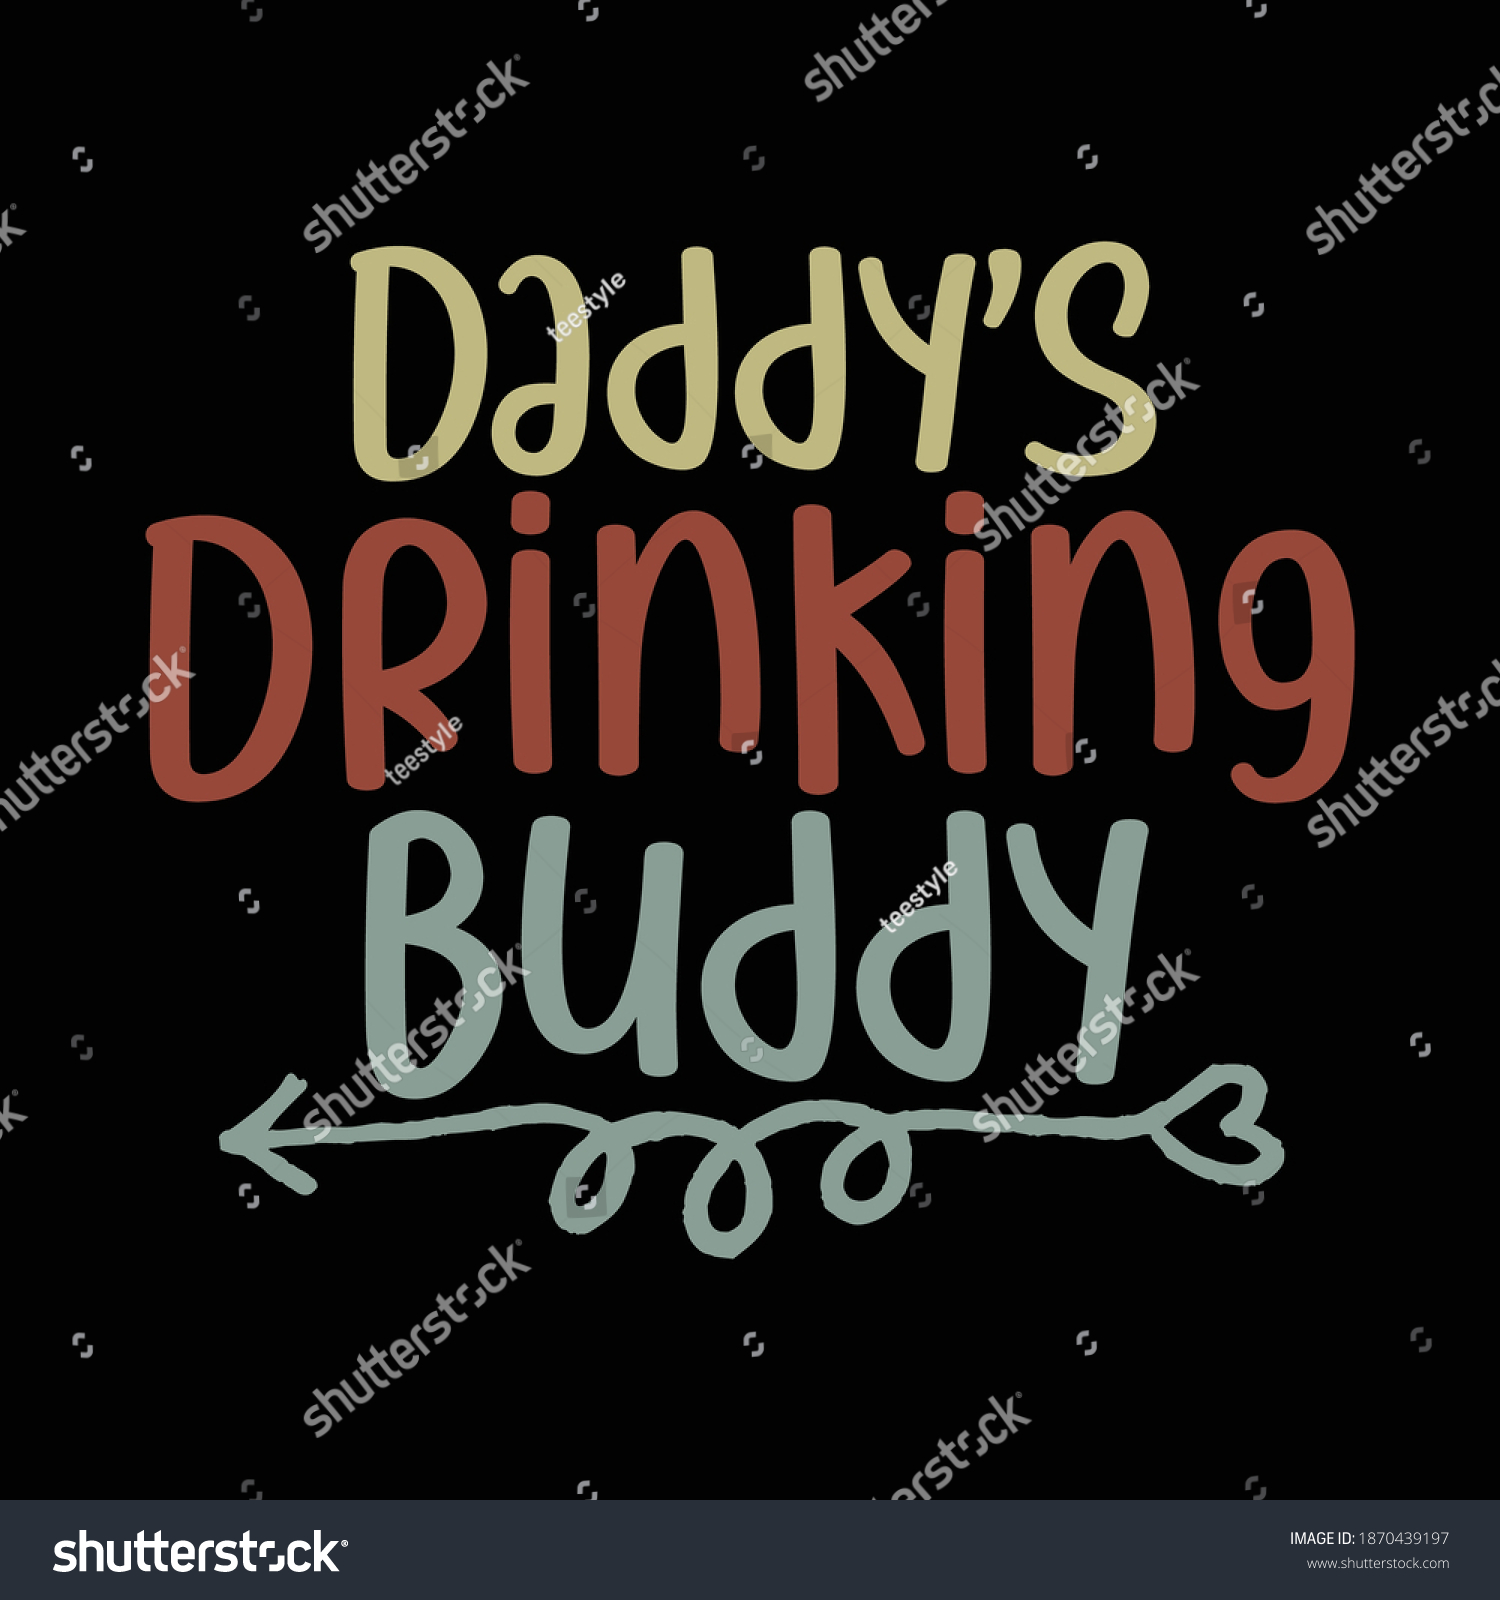 SVG of Daddy's Drinking Buddy. Typography Motivational Quotes Design, Printing For T shirt, Banner, Poster, Mug Etc, Vector Illustration svg